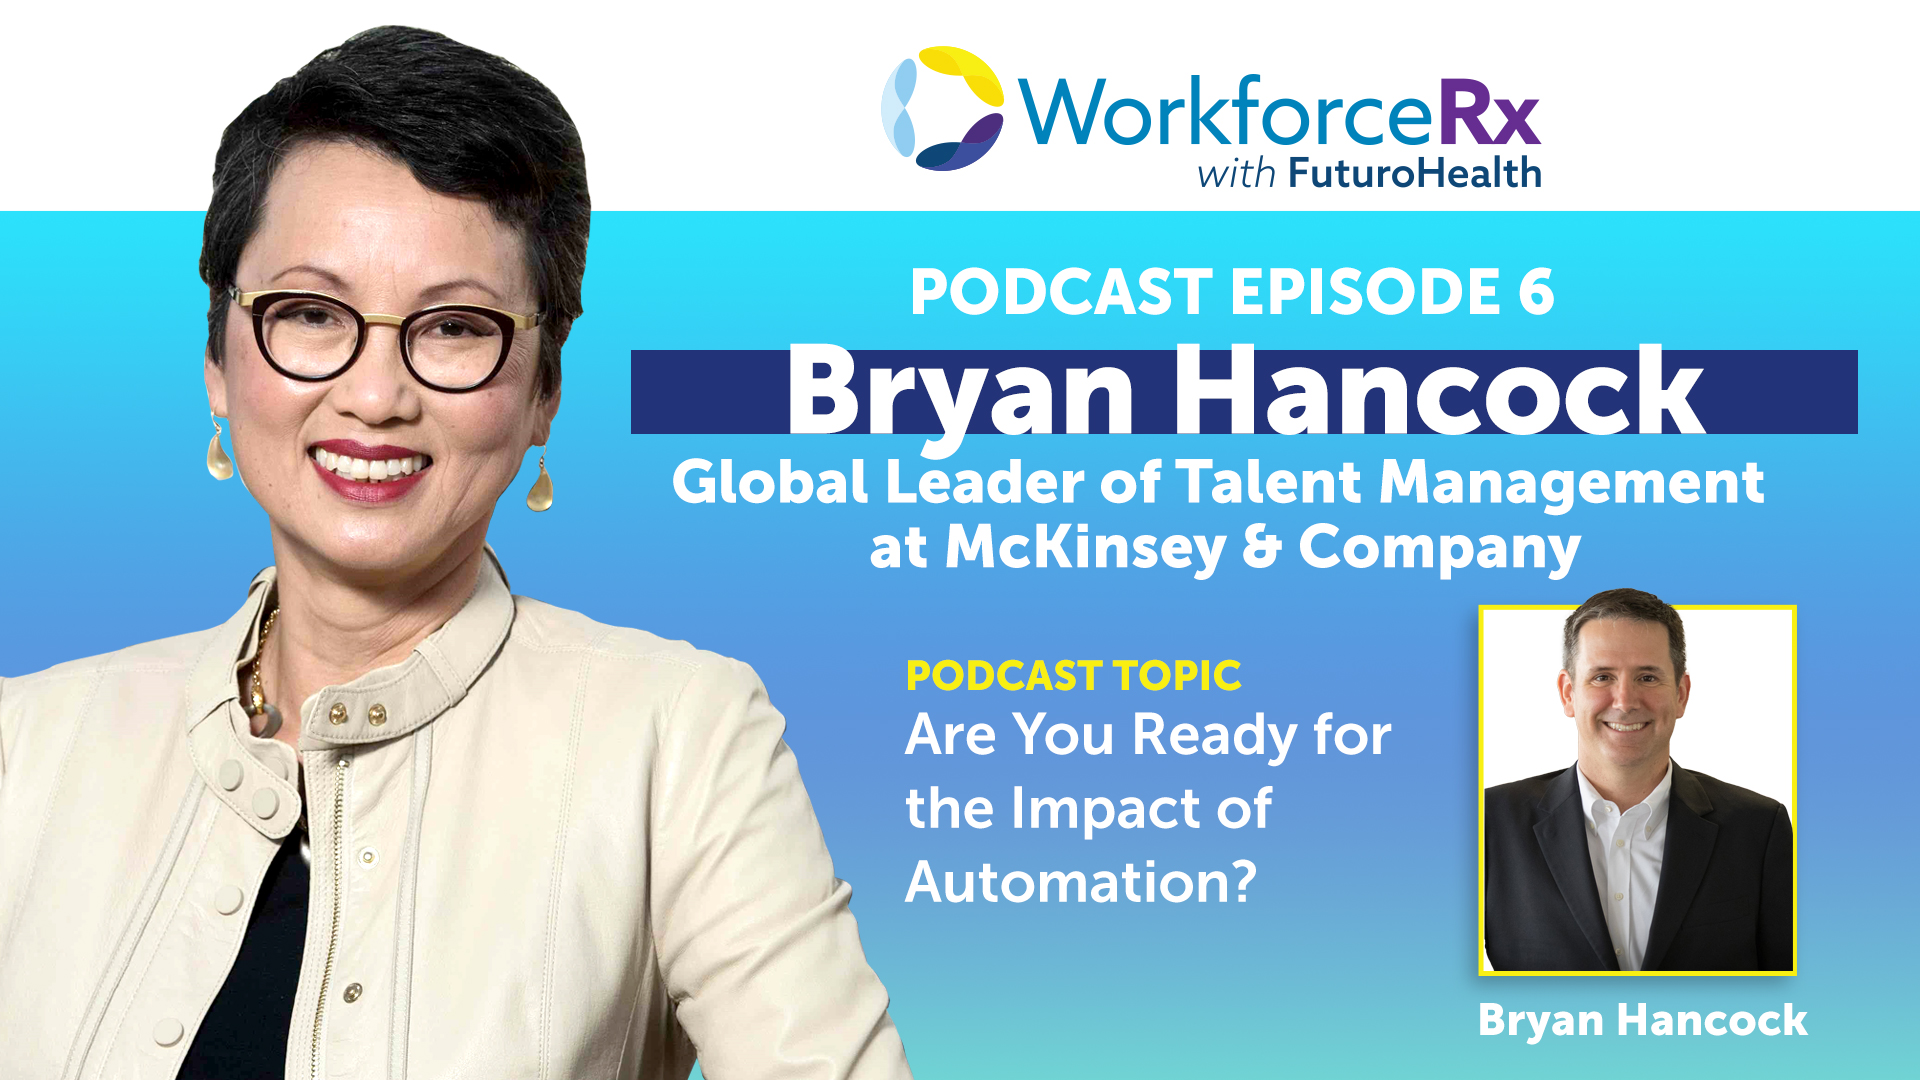 Bryan Hancock, Global Leader of Talent Management at McKinsey & Company: Are You Ready for the Impact of Automation?